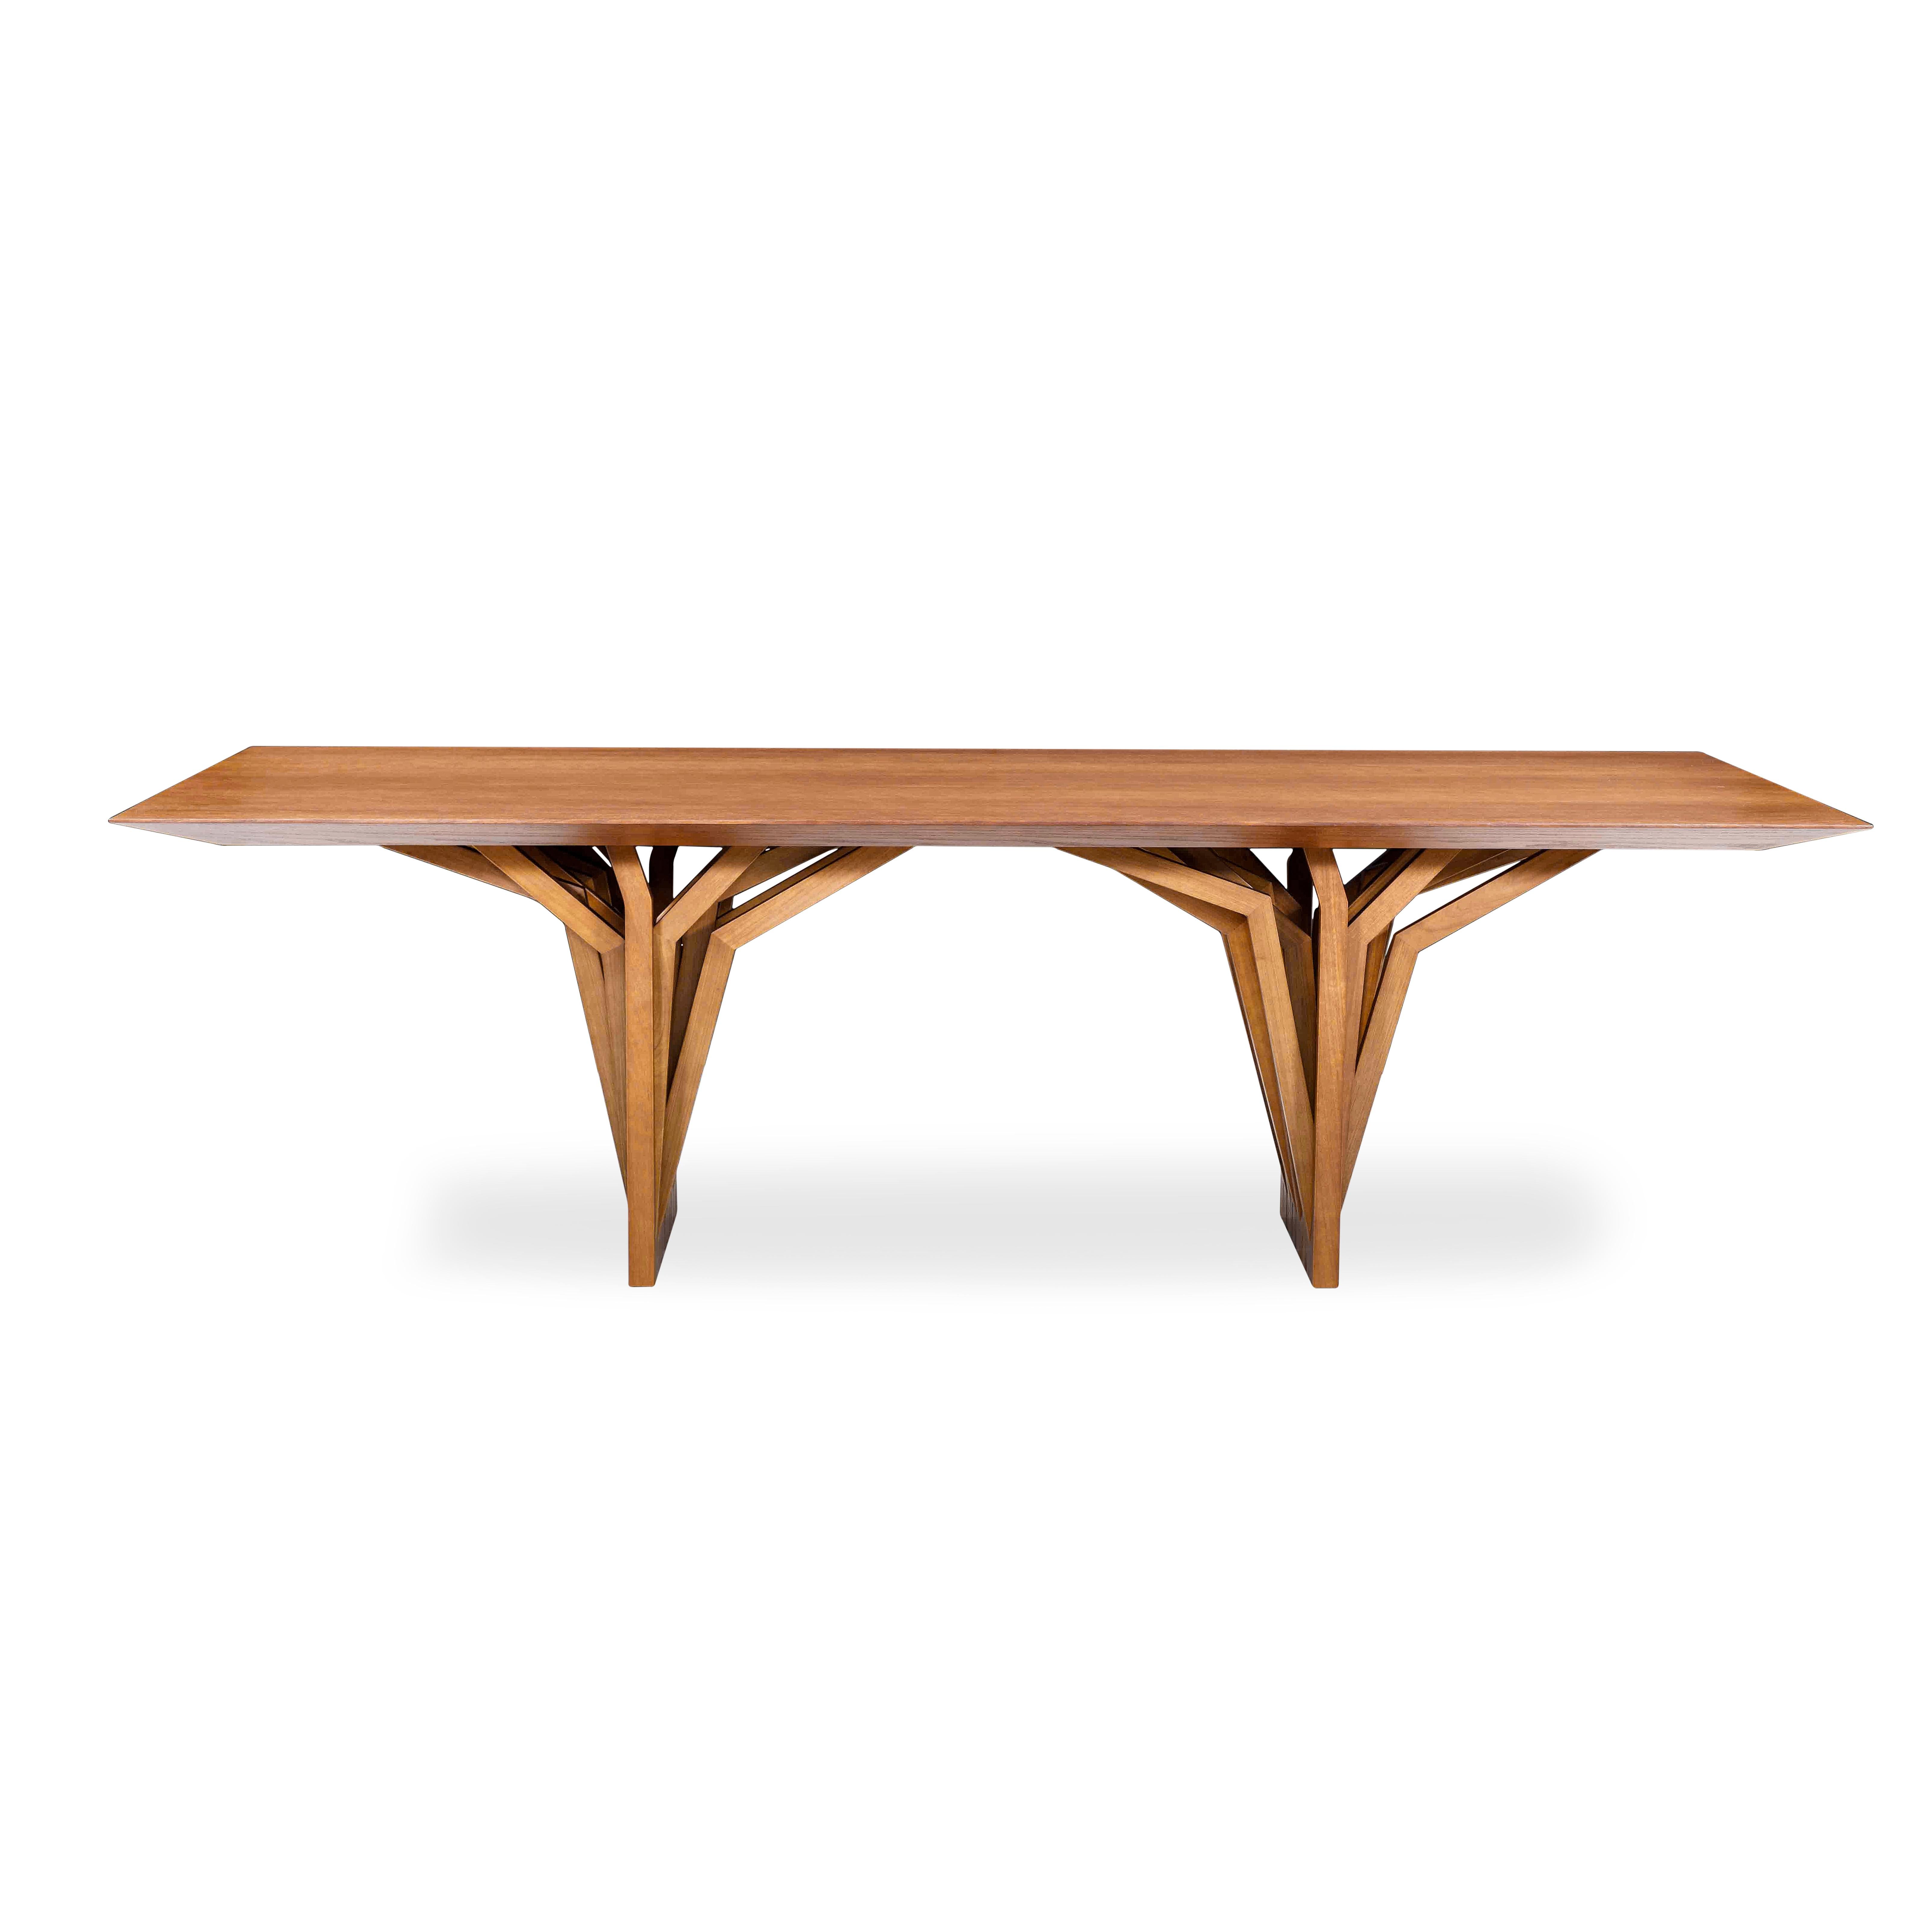 The Radi dining table is this masterpiece in an oak finish wood veneer top and an original roofing anchor table base, inspired by the aerial roots of trees. This dining table is a very simple piece that the Uultis team has created with materials and